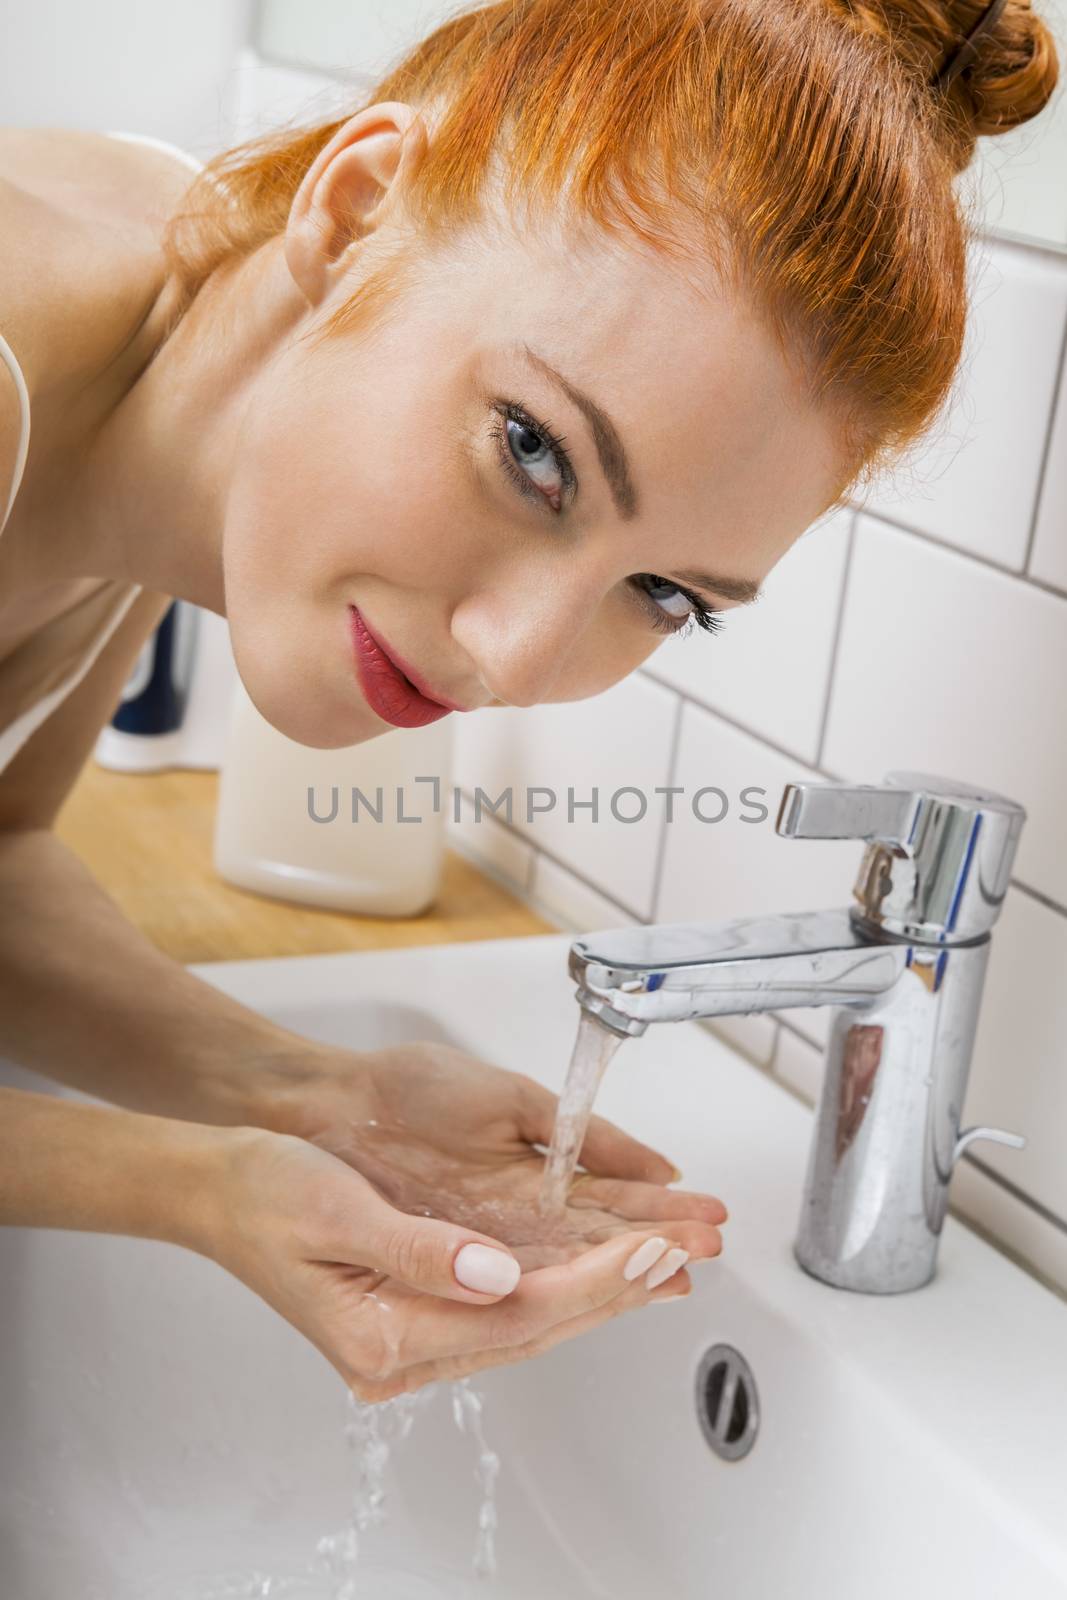 Woman Washing her Face While Looking at the Camera by juniart